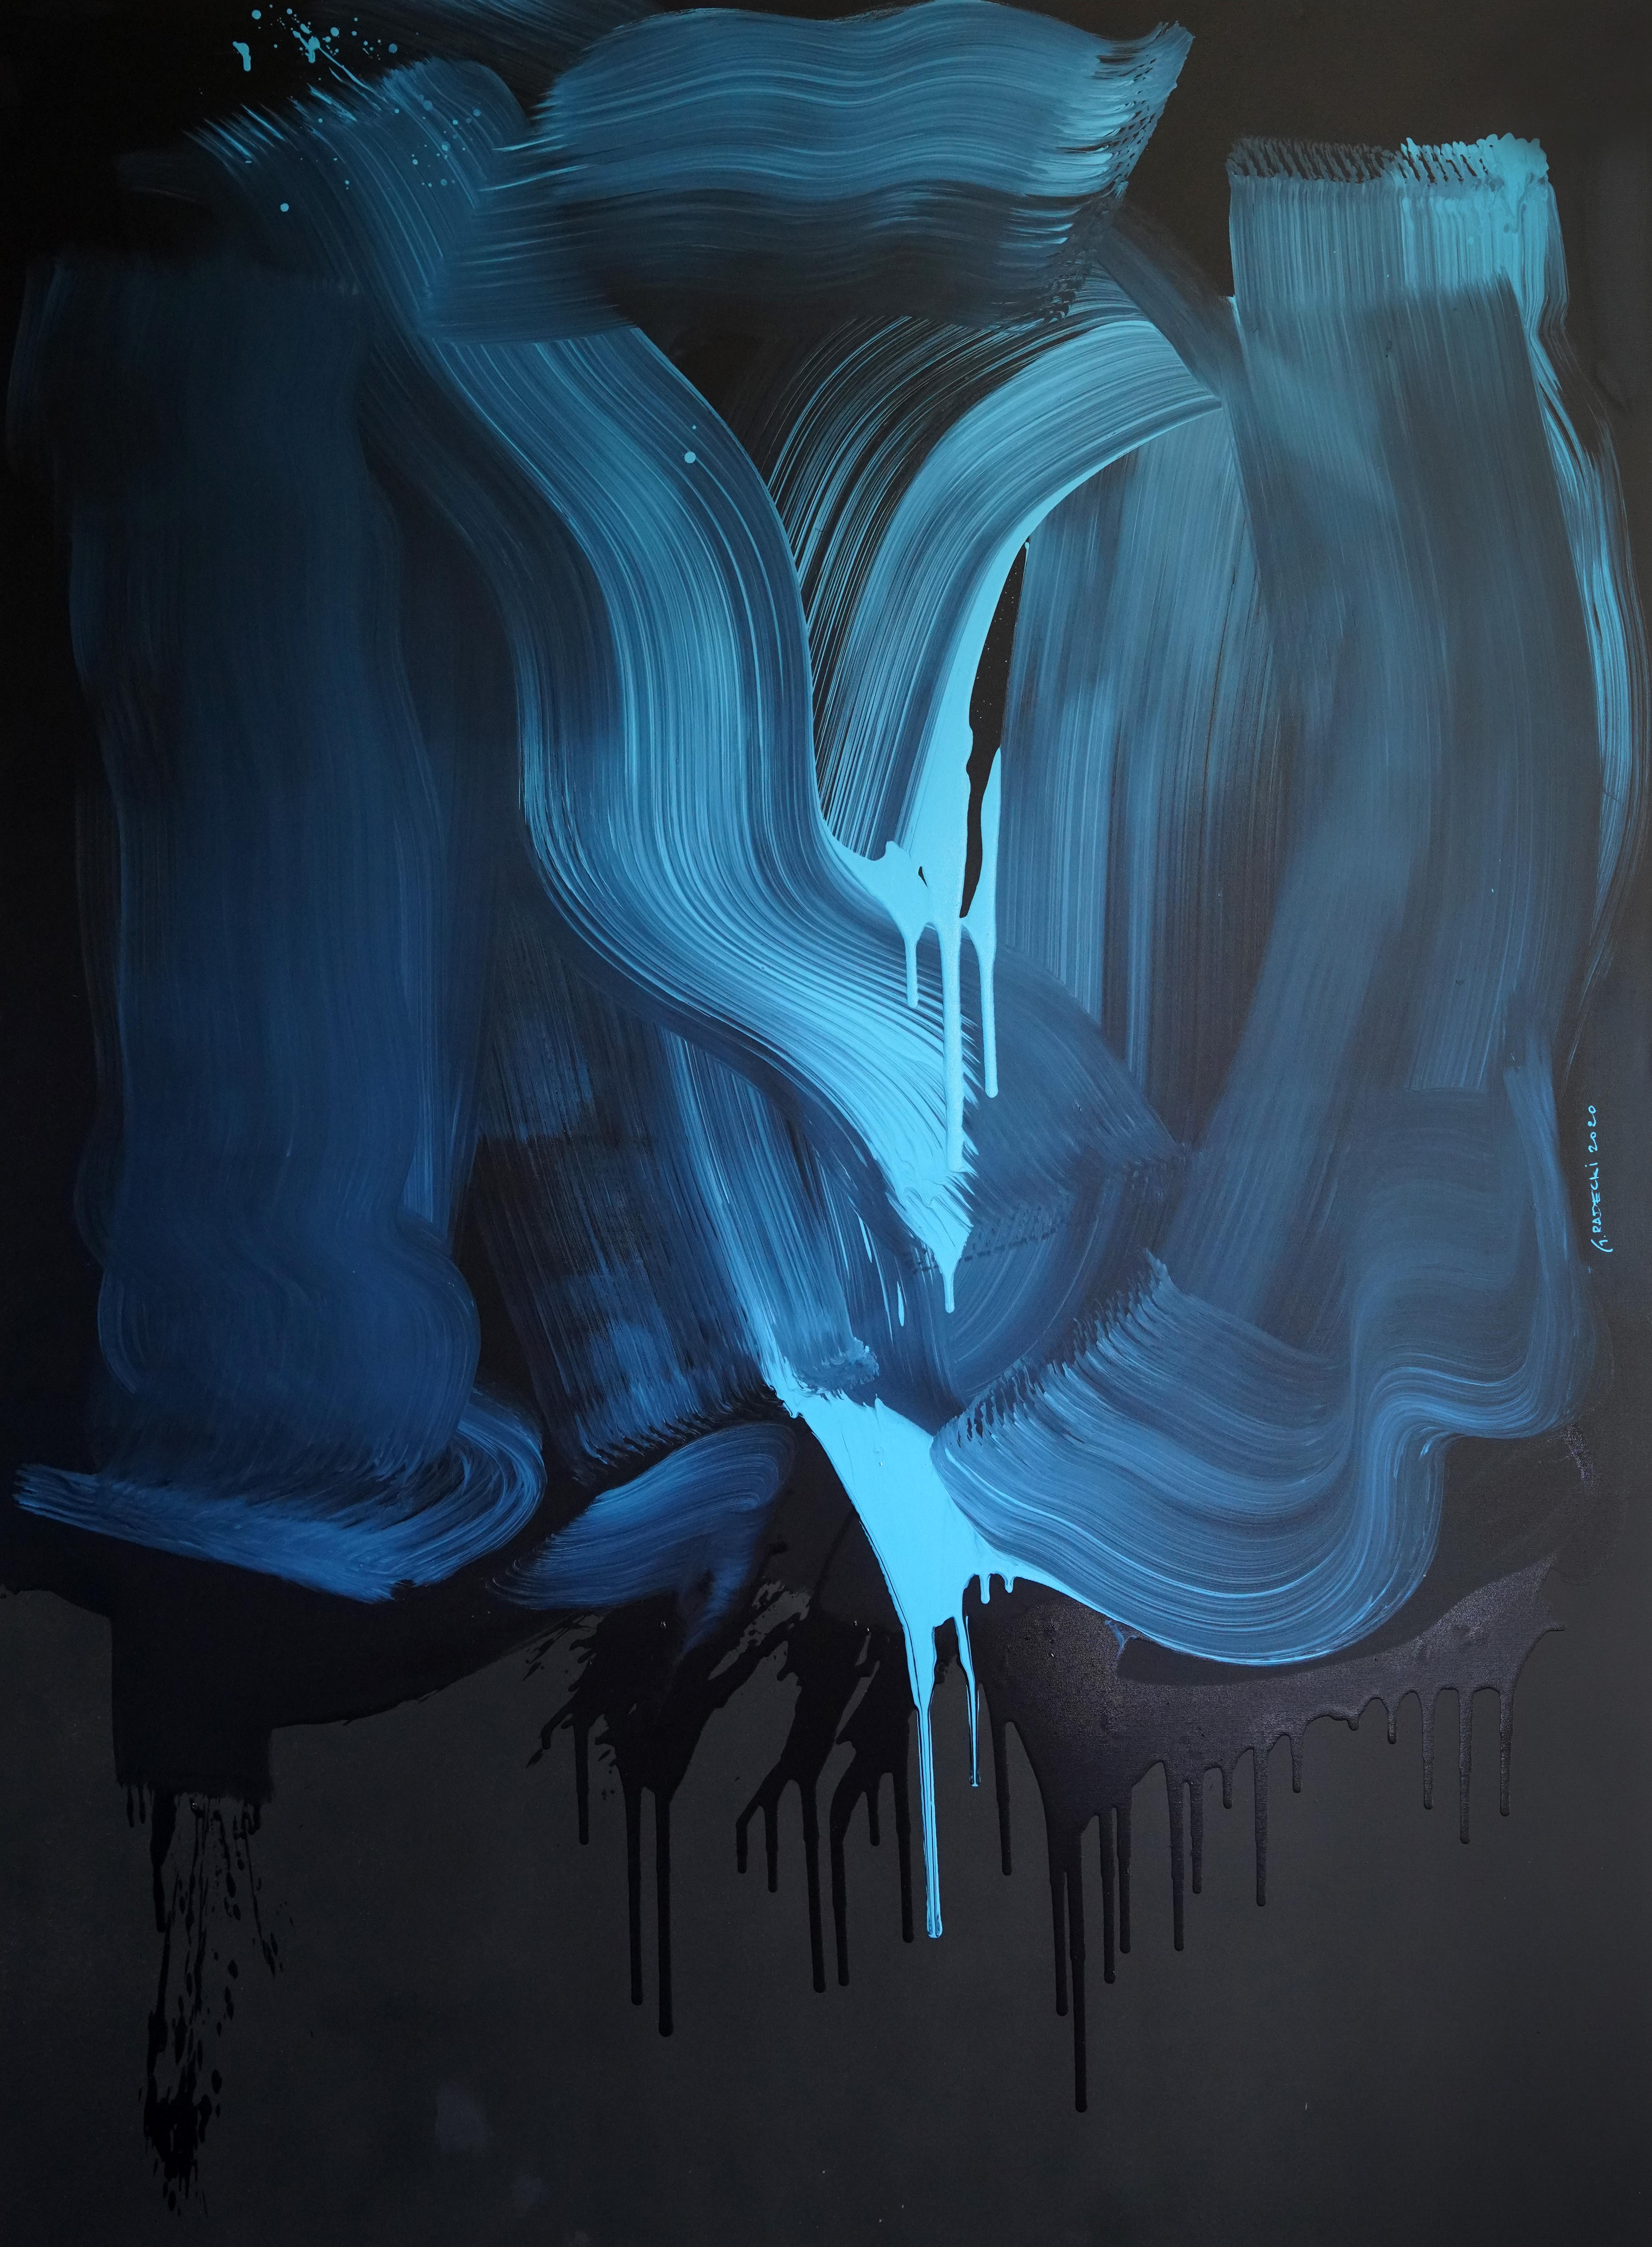 Grzegorz Radecki Figurative Painting - Blue on Black - Series Blobs - Colourful Expression, XL Format Oil Painting